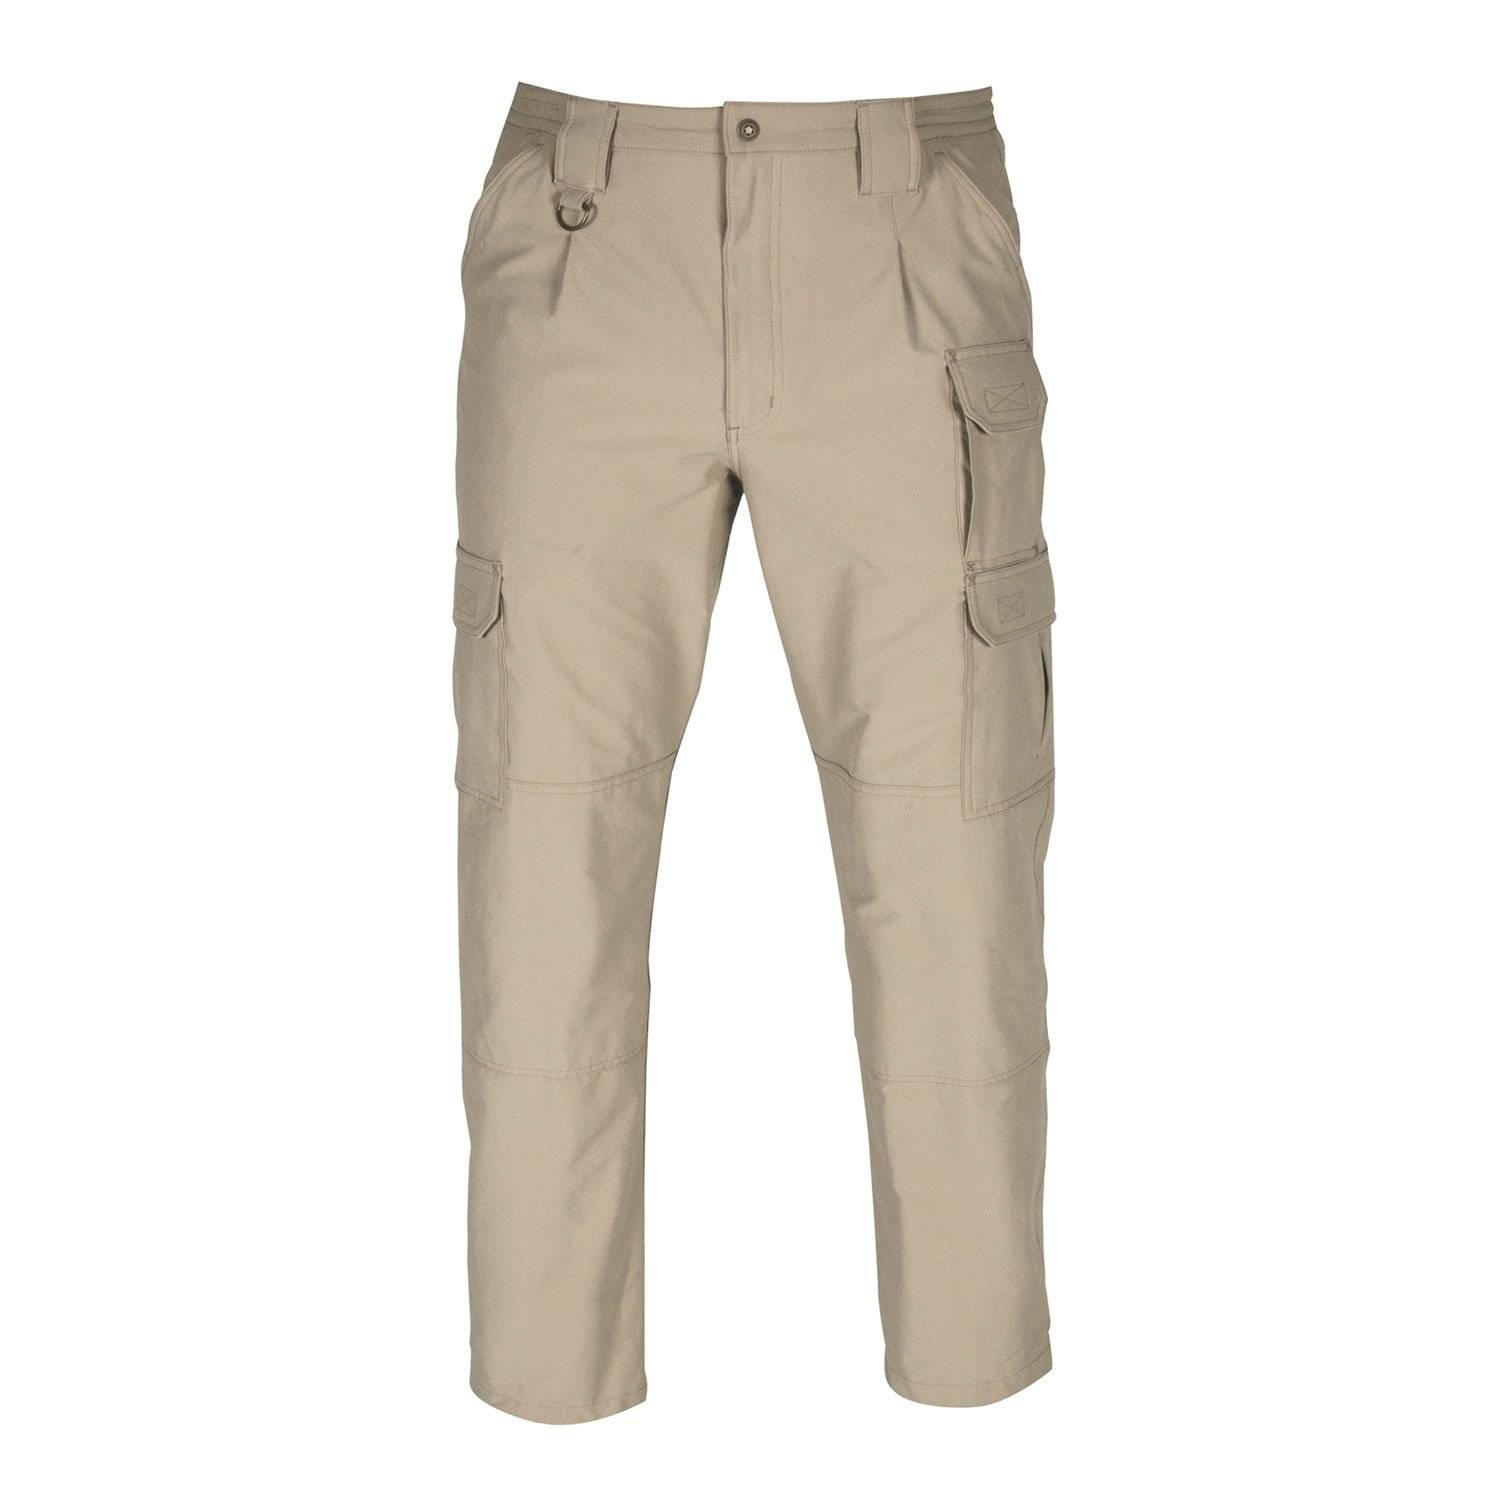 Propper Tactical Pant with Stretch.